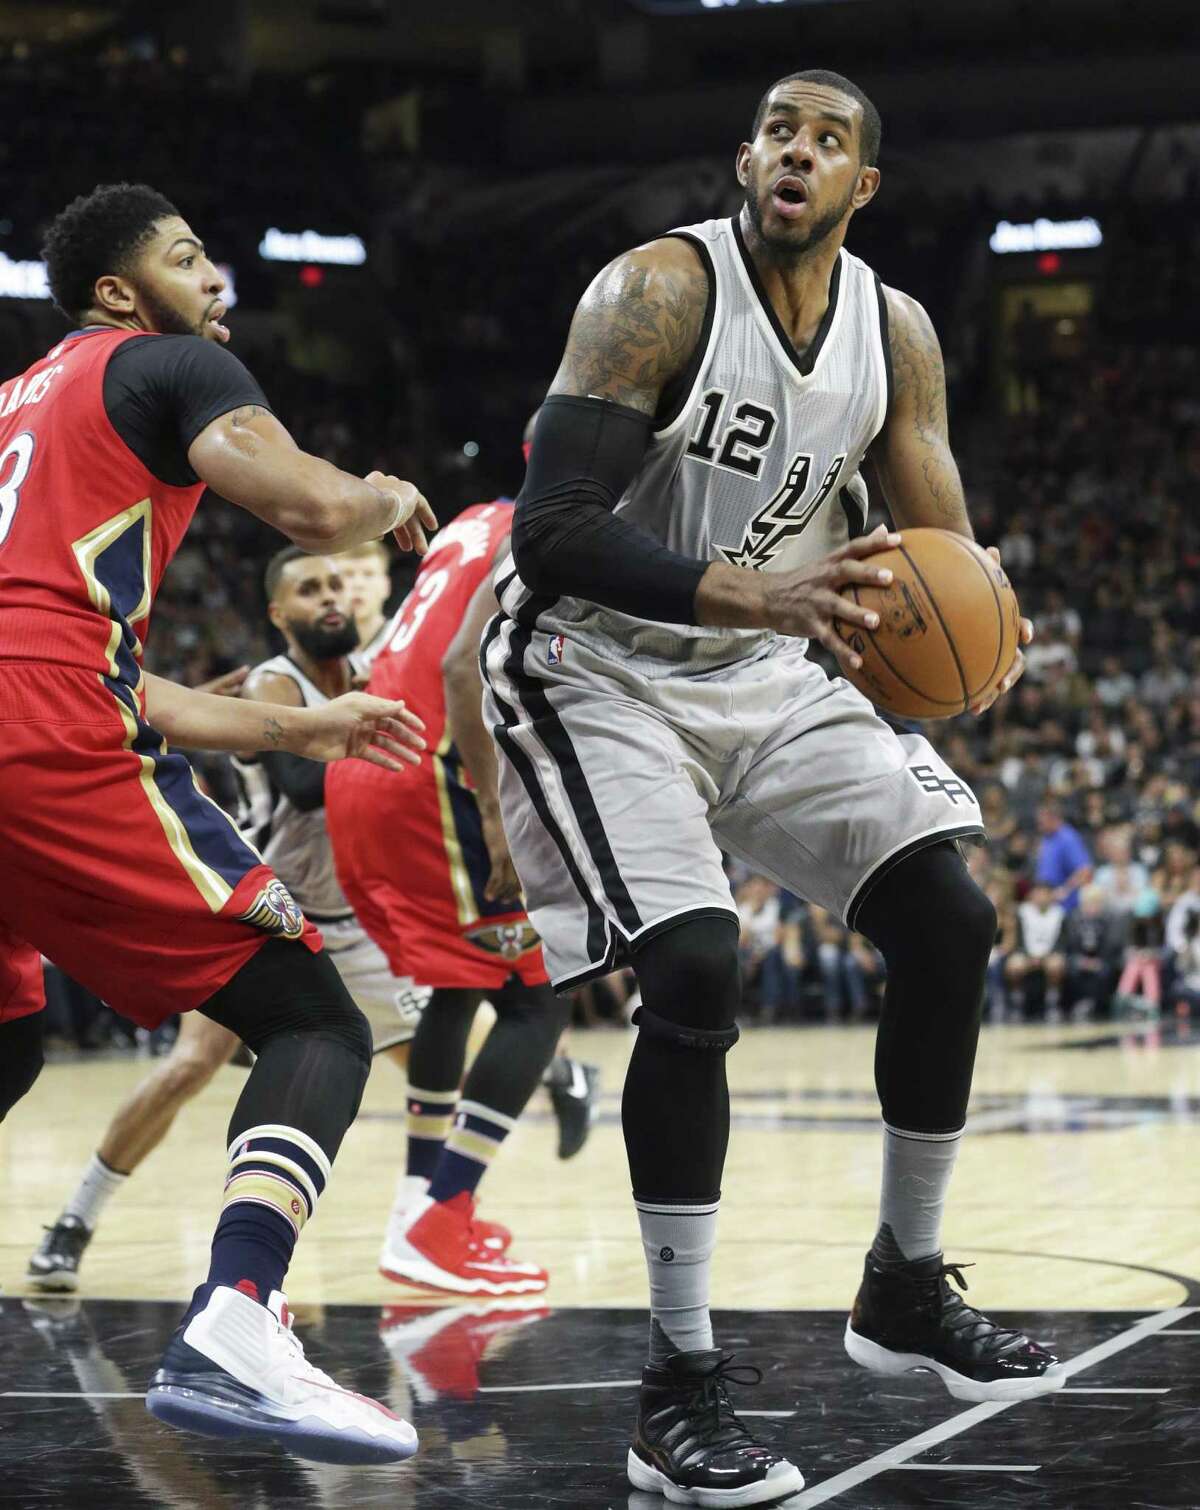 La Marcus Aldridge spots the basket as he sets up in the lane as the Spurs host the Pelicans at the AT&T Center on October 29, 2016.